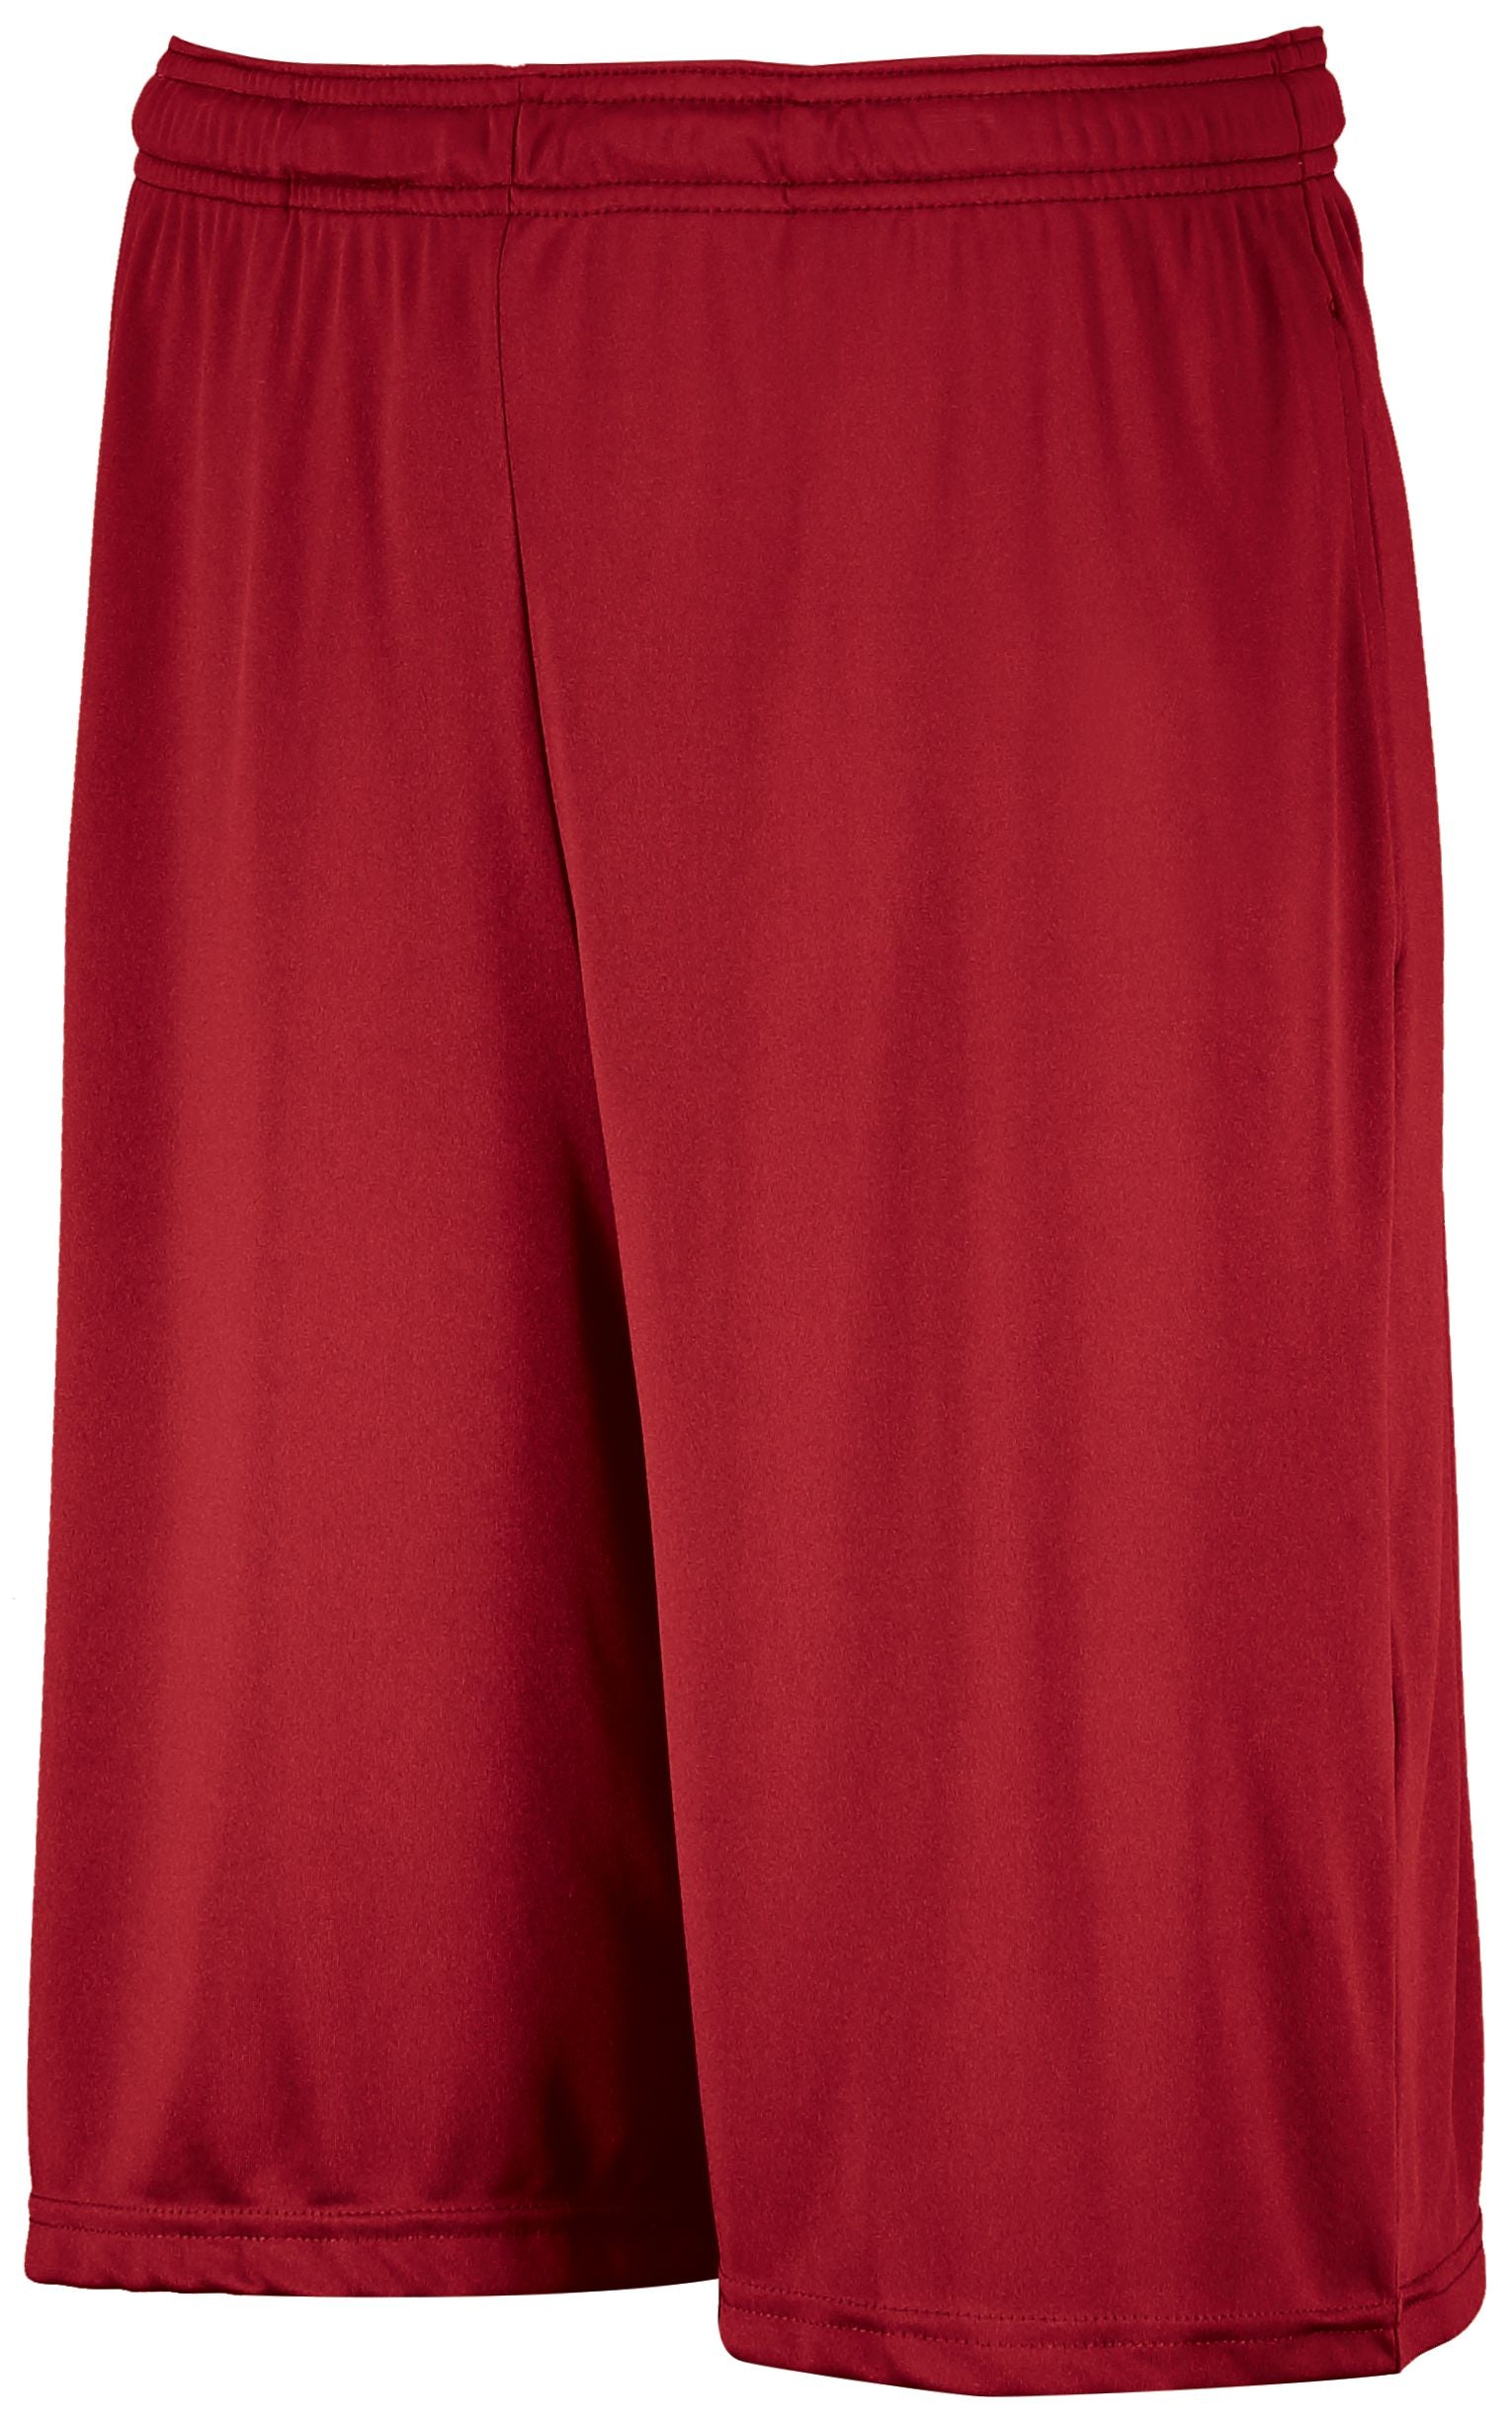 Russell Athletic Youth Dri-Power Essential Performance Shorts With Pockets in True Red  -Part of the Youth, Youth-Shorts, Russell-Athletic-Products product lines at KanaleyCreations.com